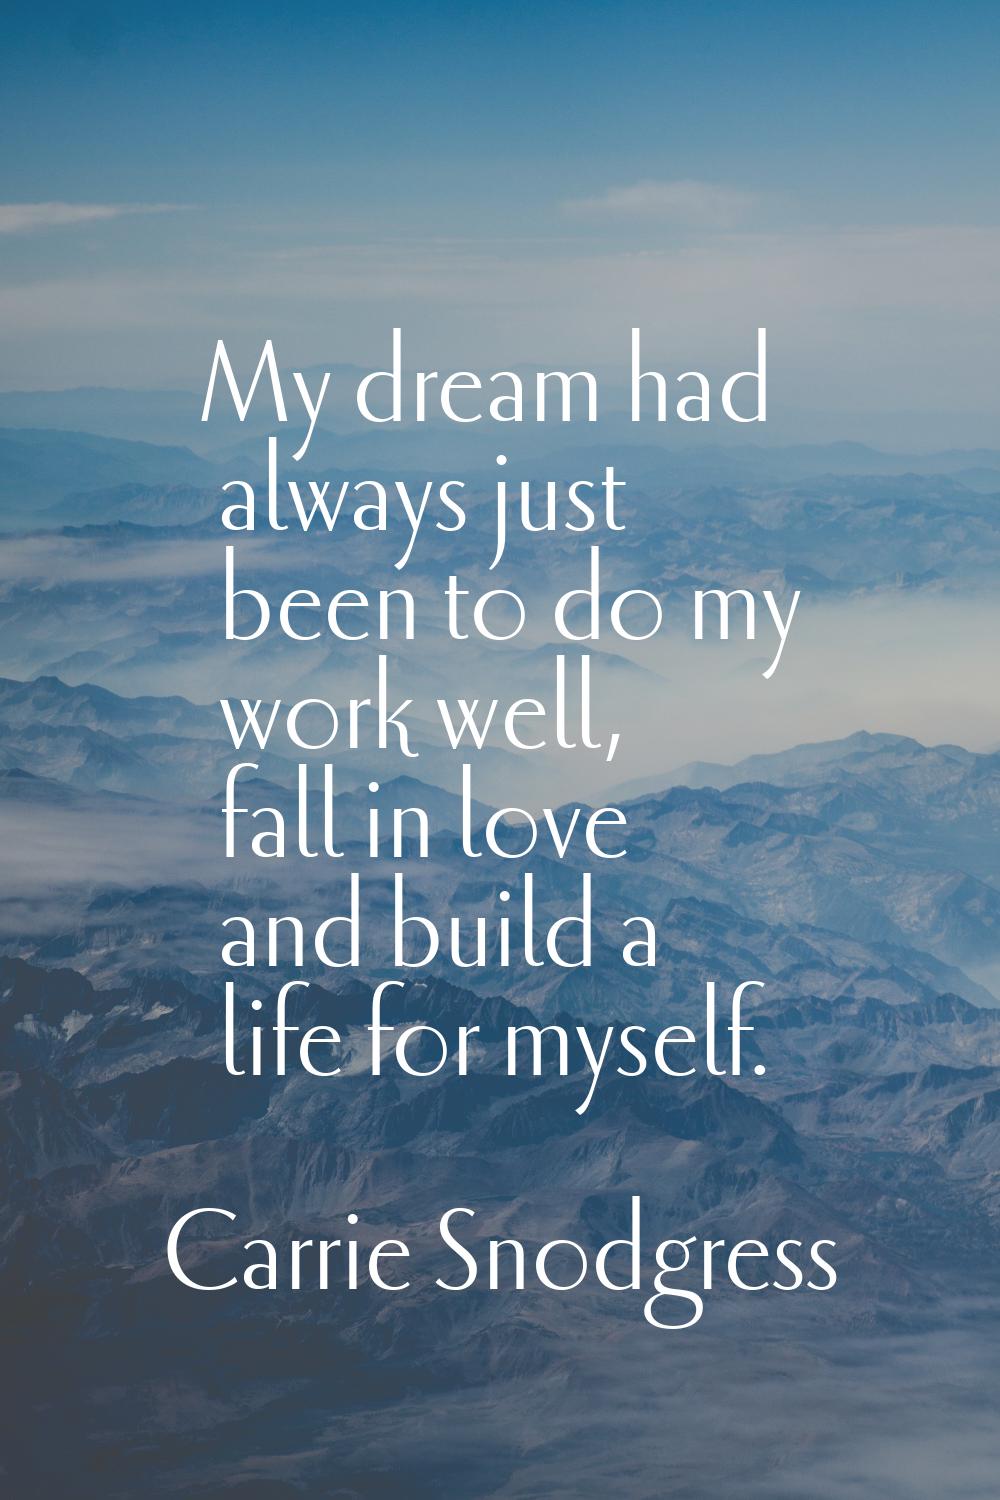 My dream had always just been to do my work well, fall in love and build a life for myself.